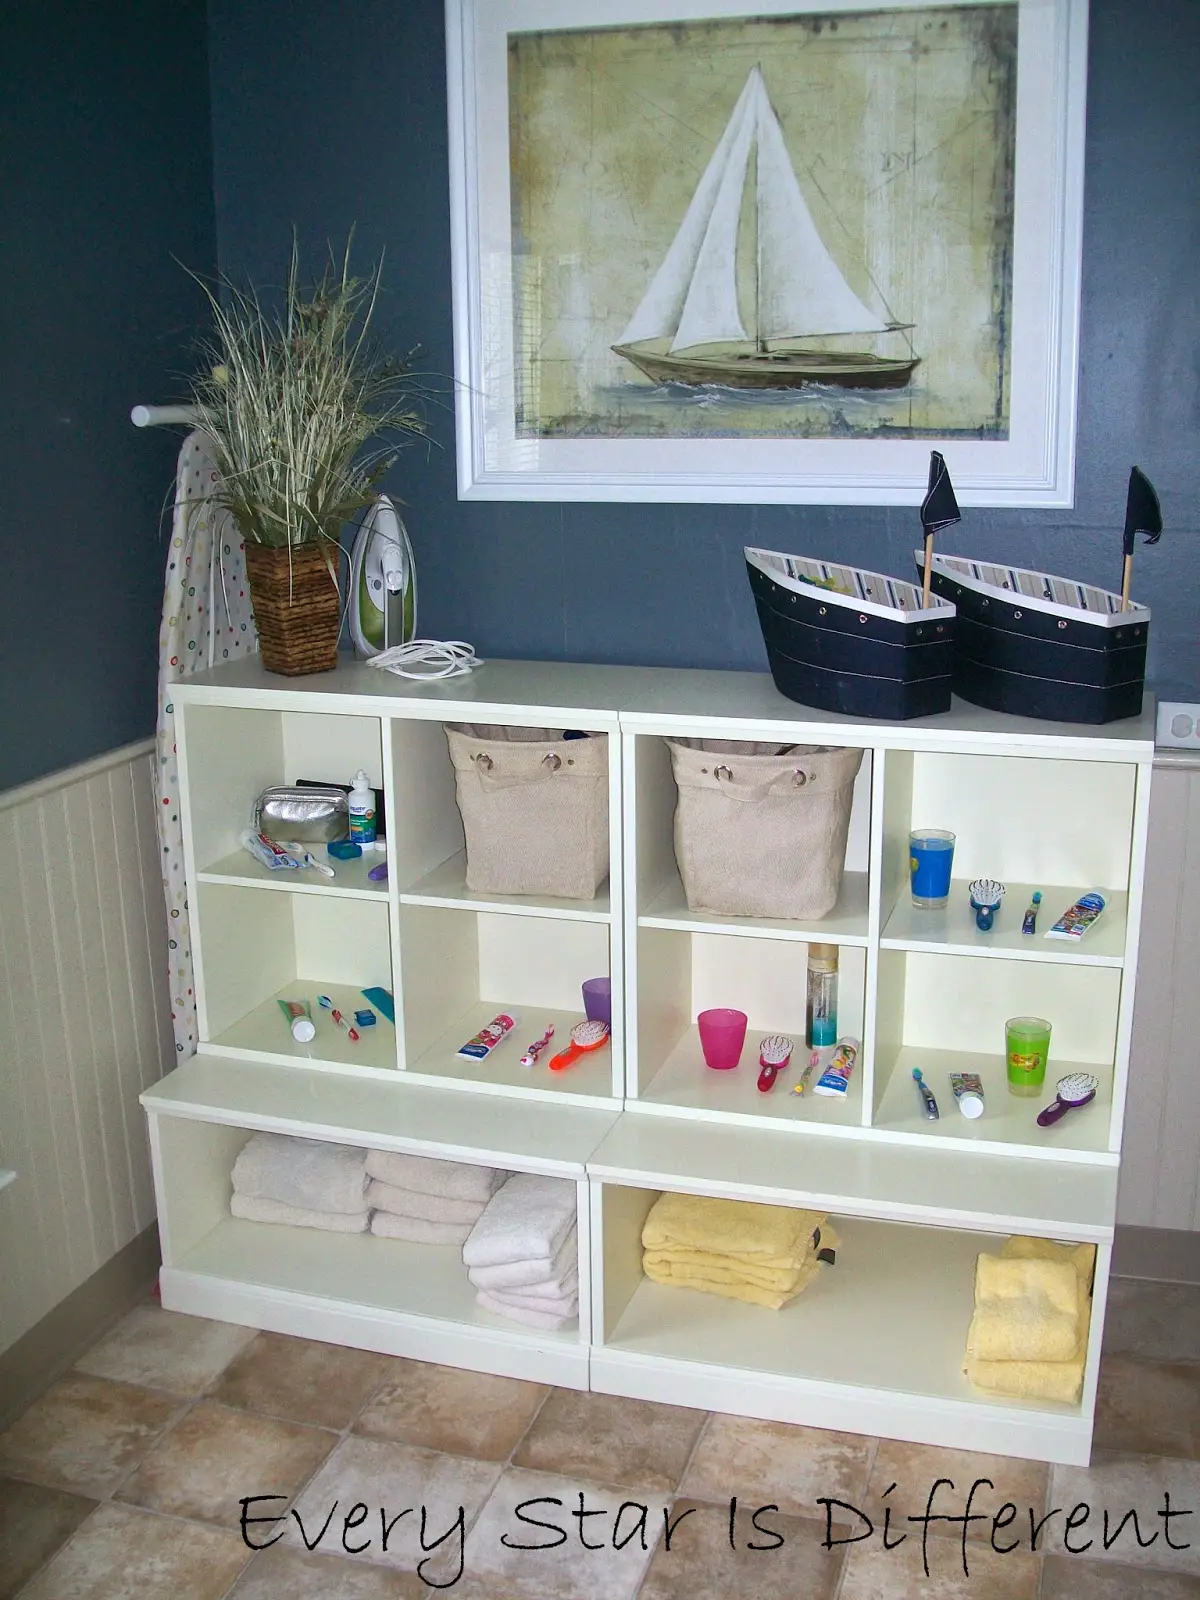 Bathroom organization ideas with cubbies in the bathroom to organize brushes, toothpaste and such